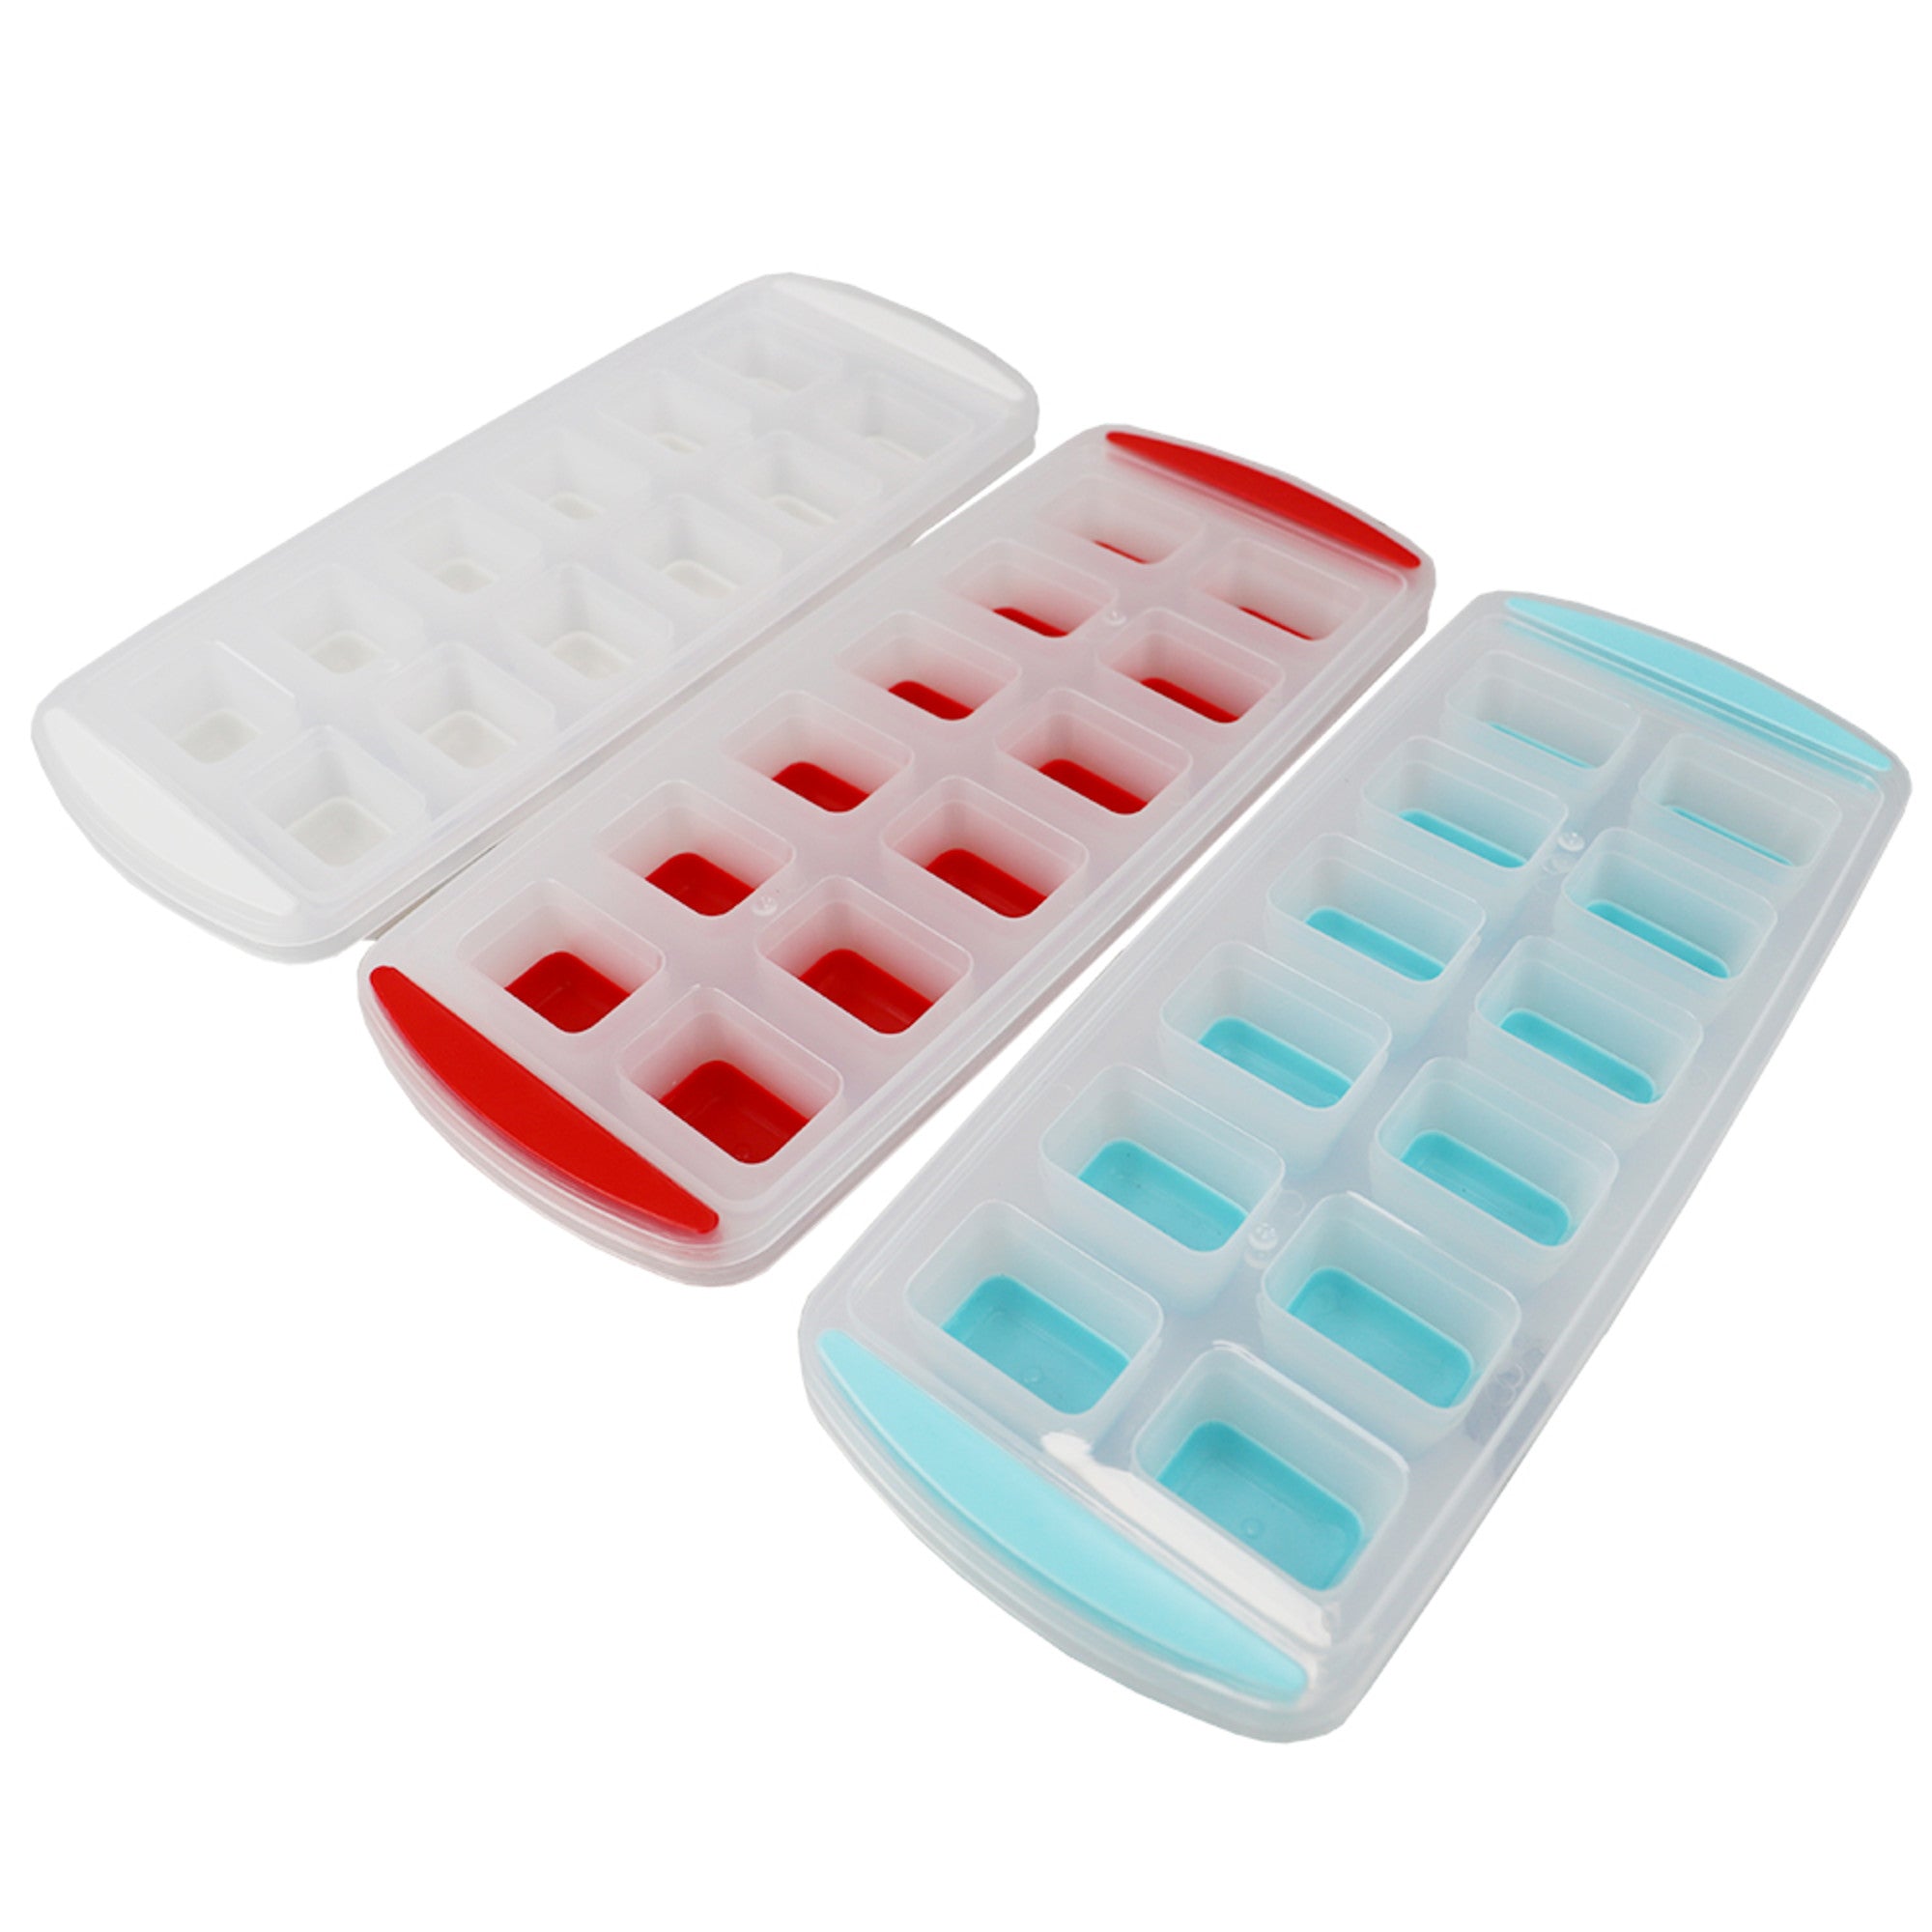 Home Basics Ice Cube Tray with Round Compartments, (Pack of 2